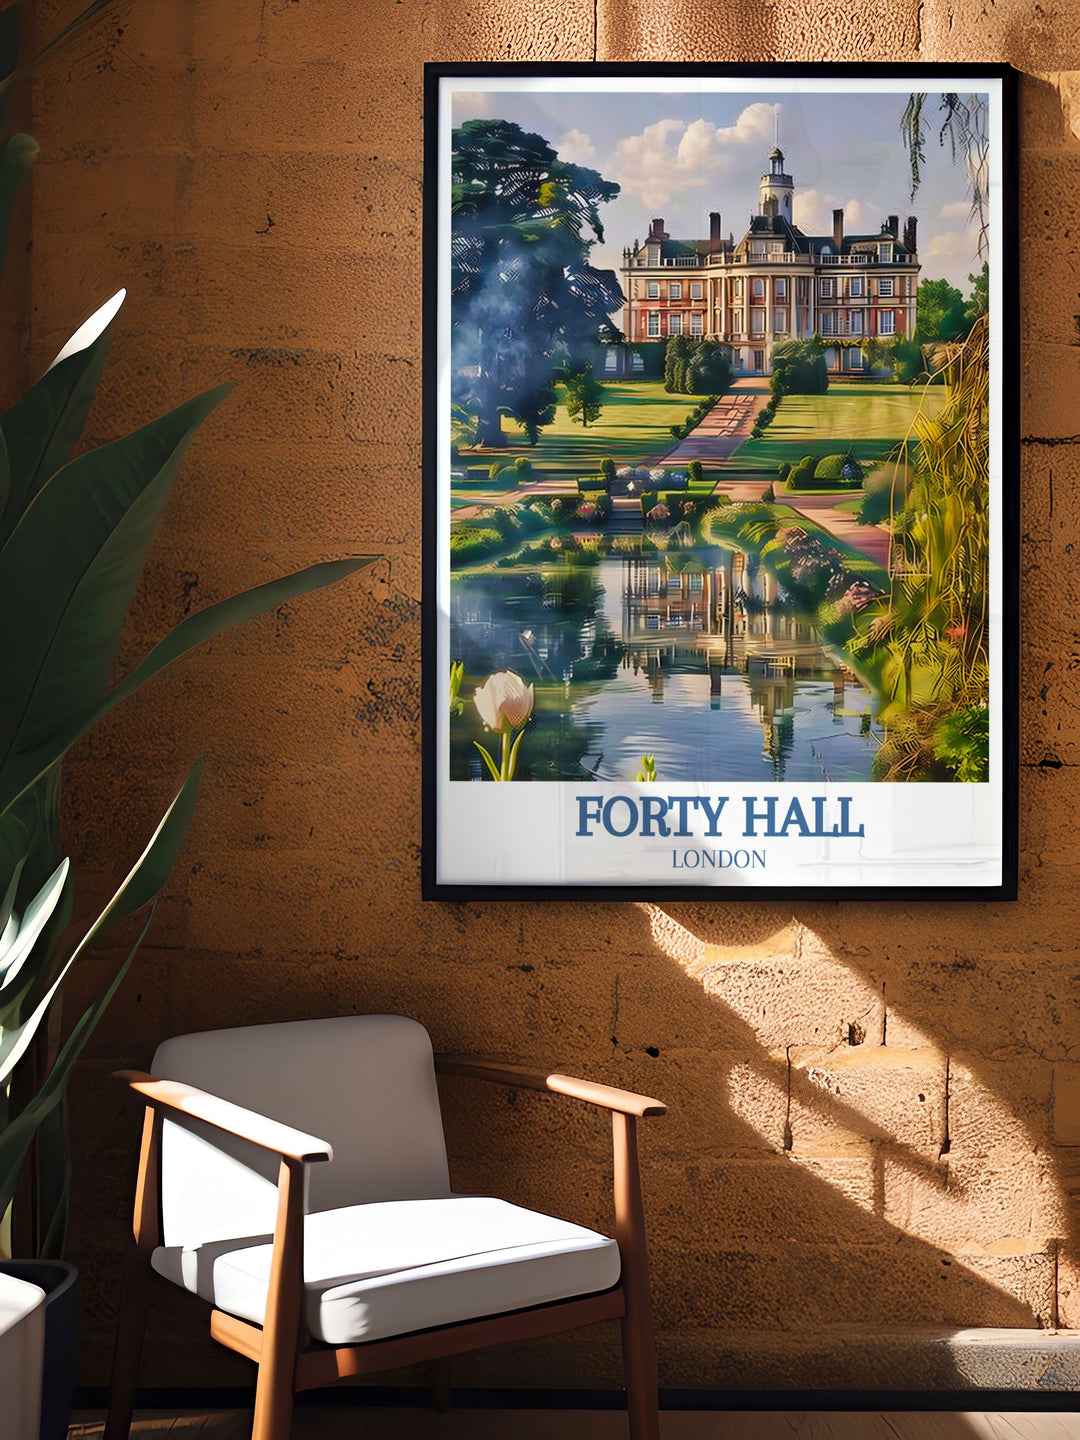 Showcasing the interior splendor of Forty Hall, this print offers a detailed view of the period furnishings and artifacts that bring Jacobean history to life.